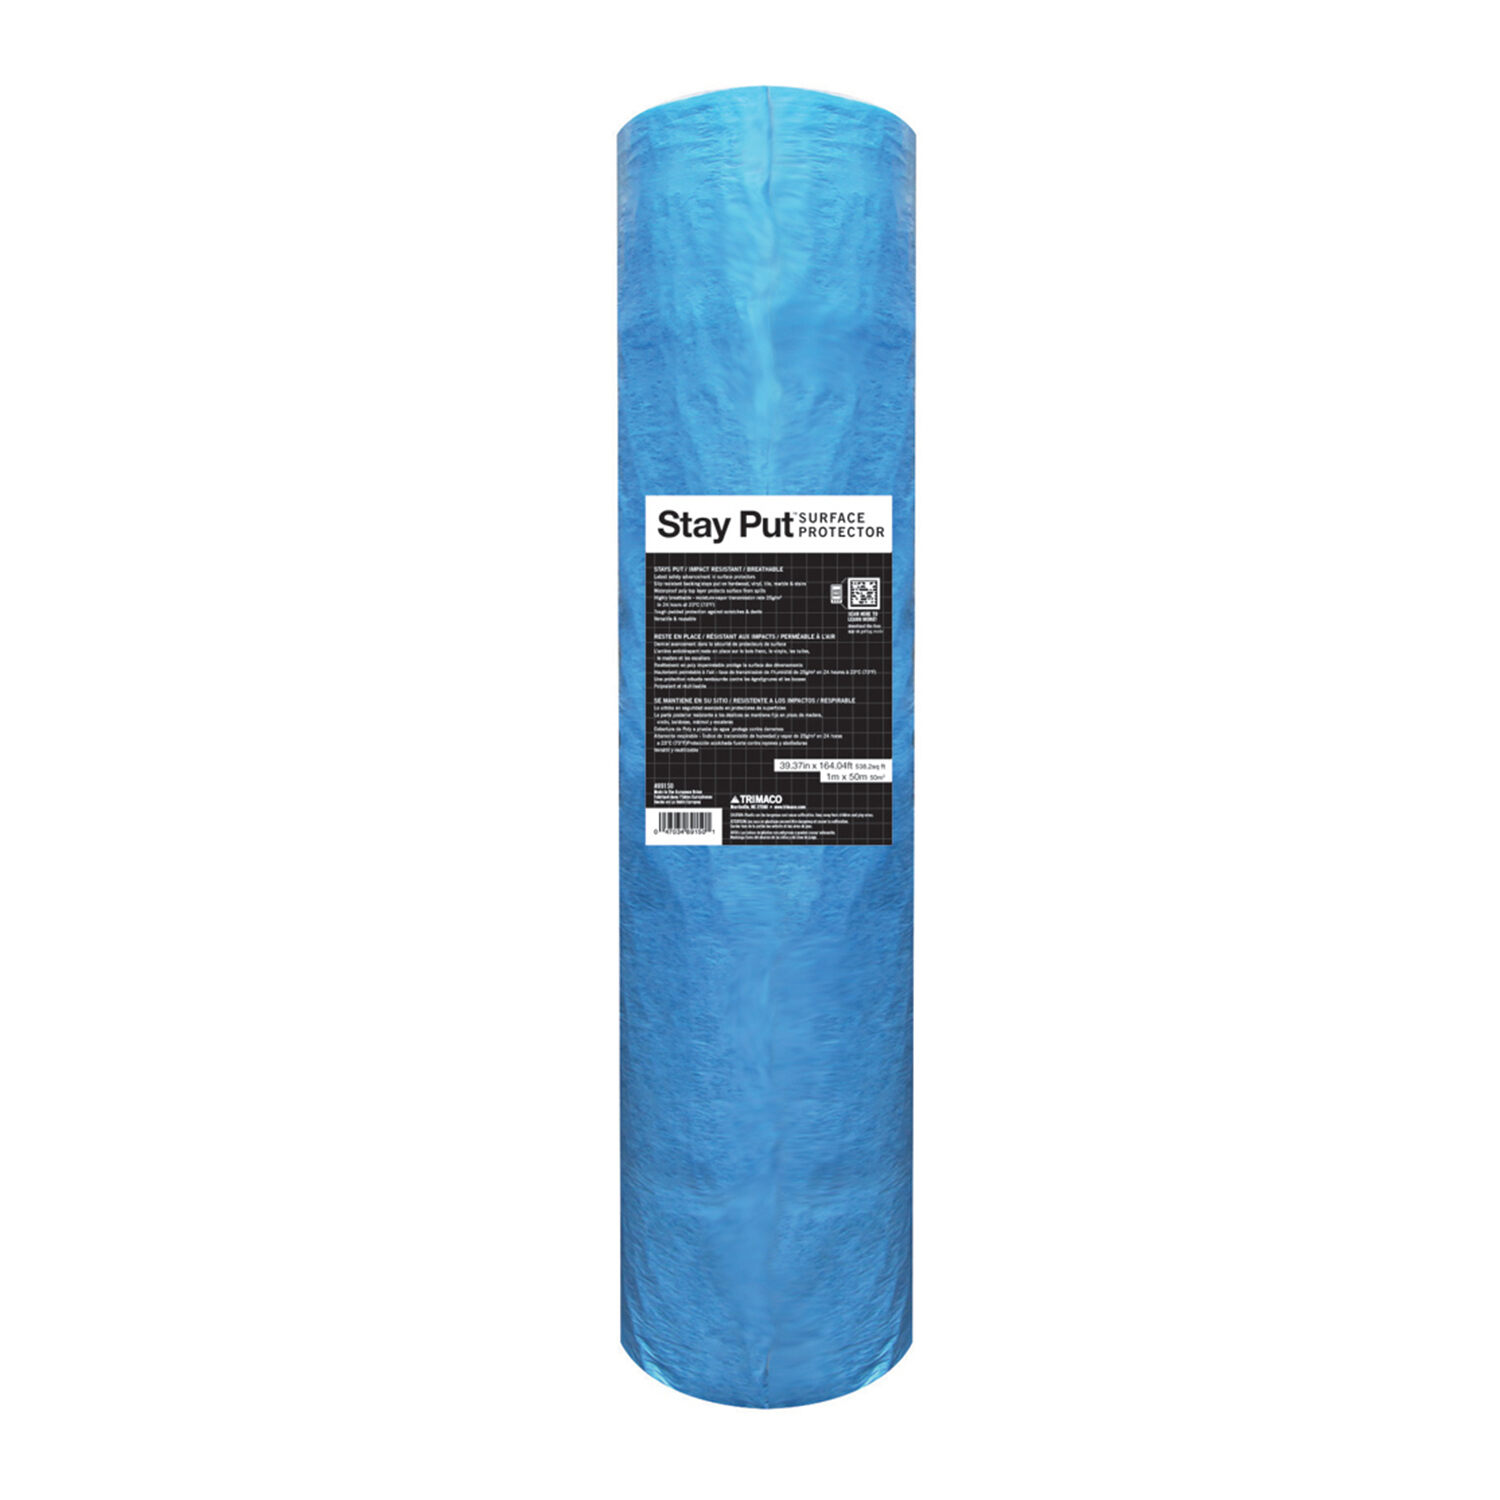 Trimaco Stay Put® Slip Resistant Padded Surface Protector, 164'